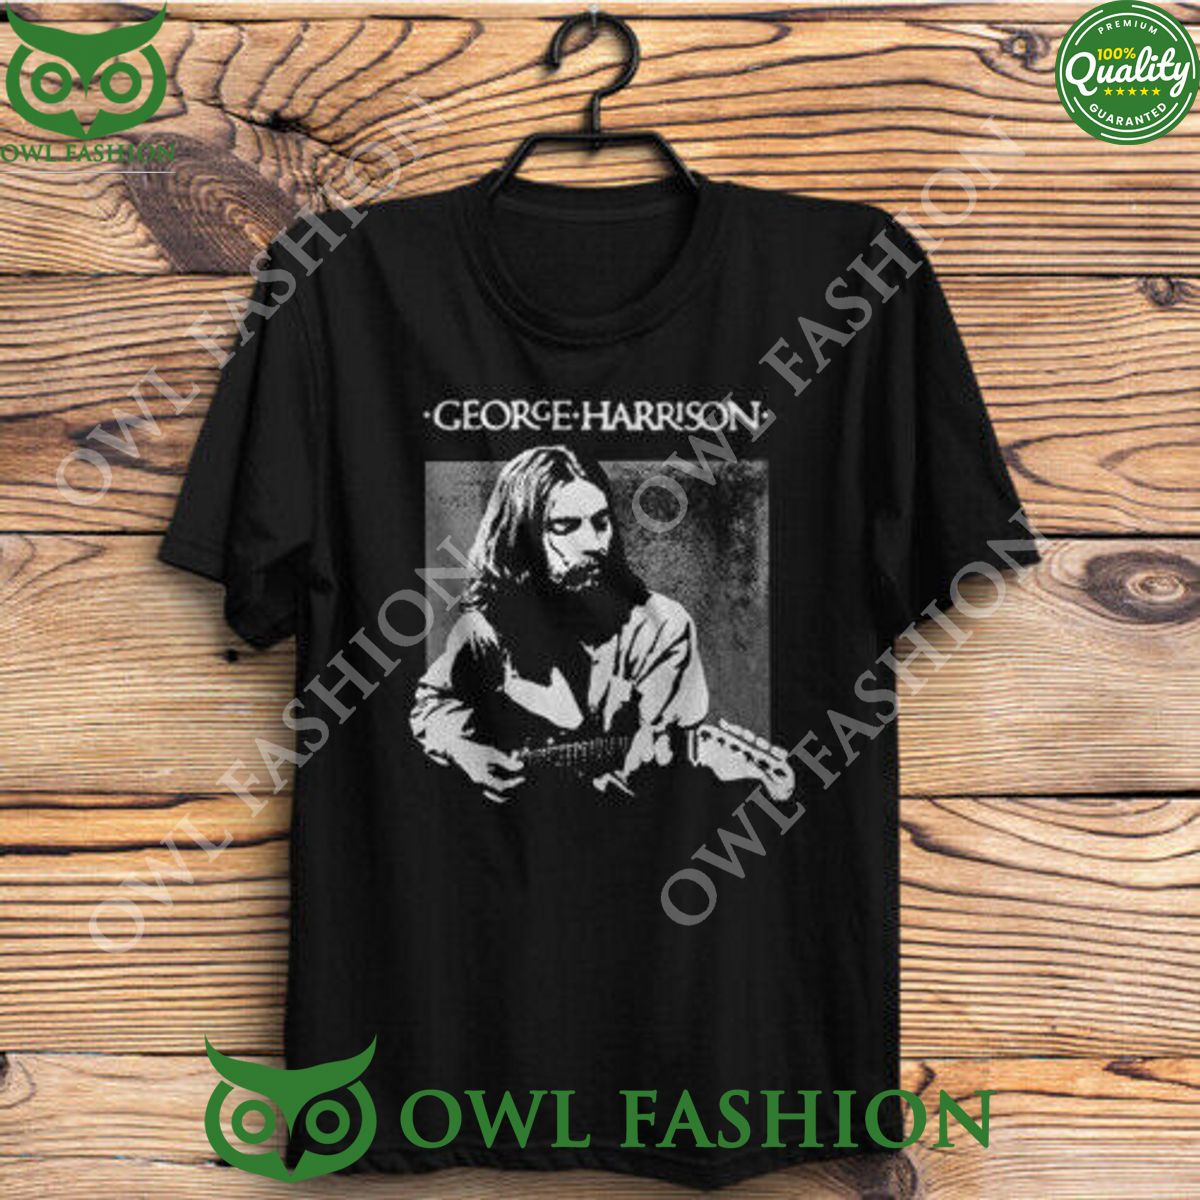 george harrison t shirt 1958 2024 66 years anniversary thank for the memories 1 LXspN.jpg